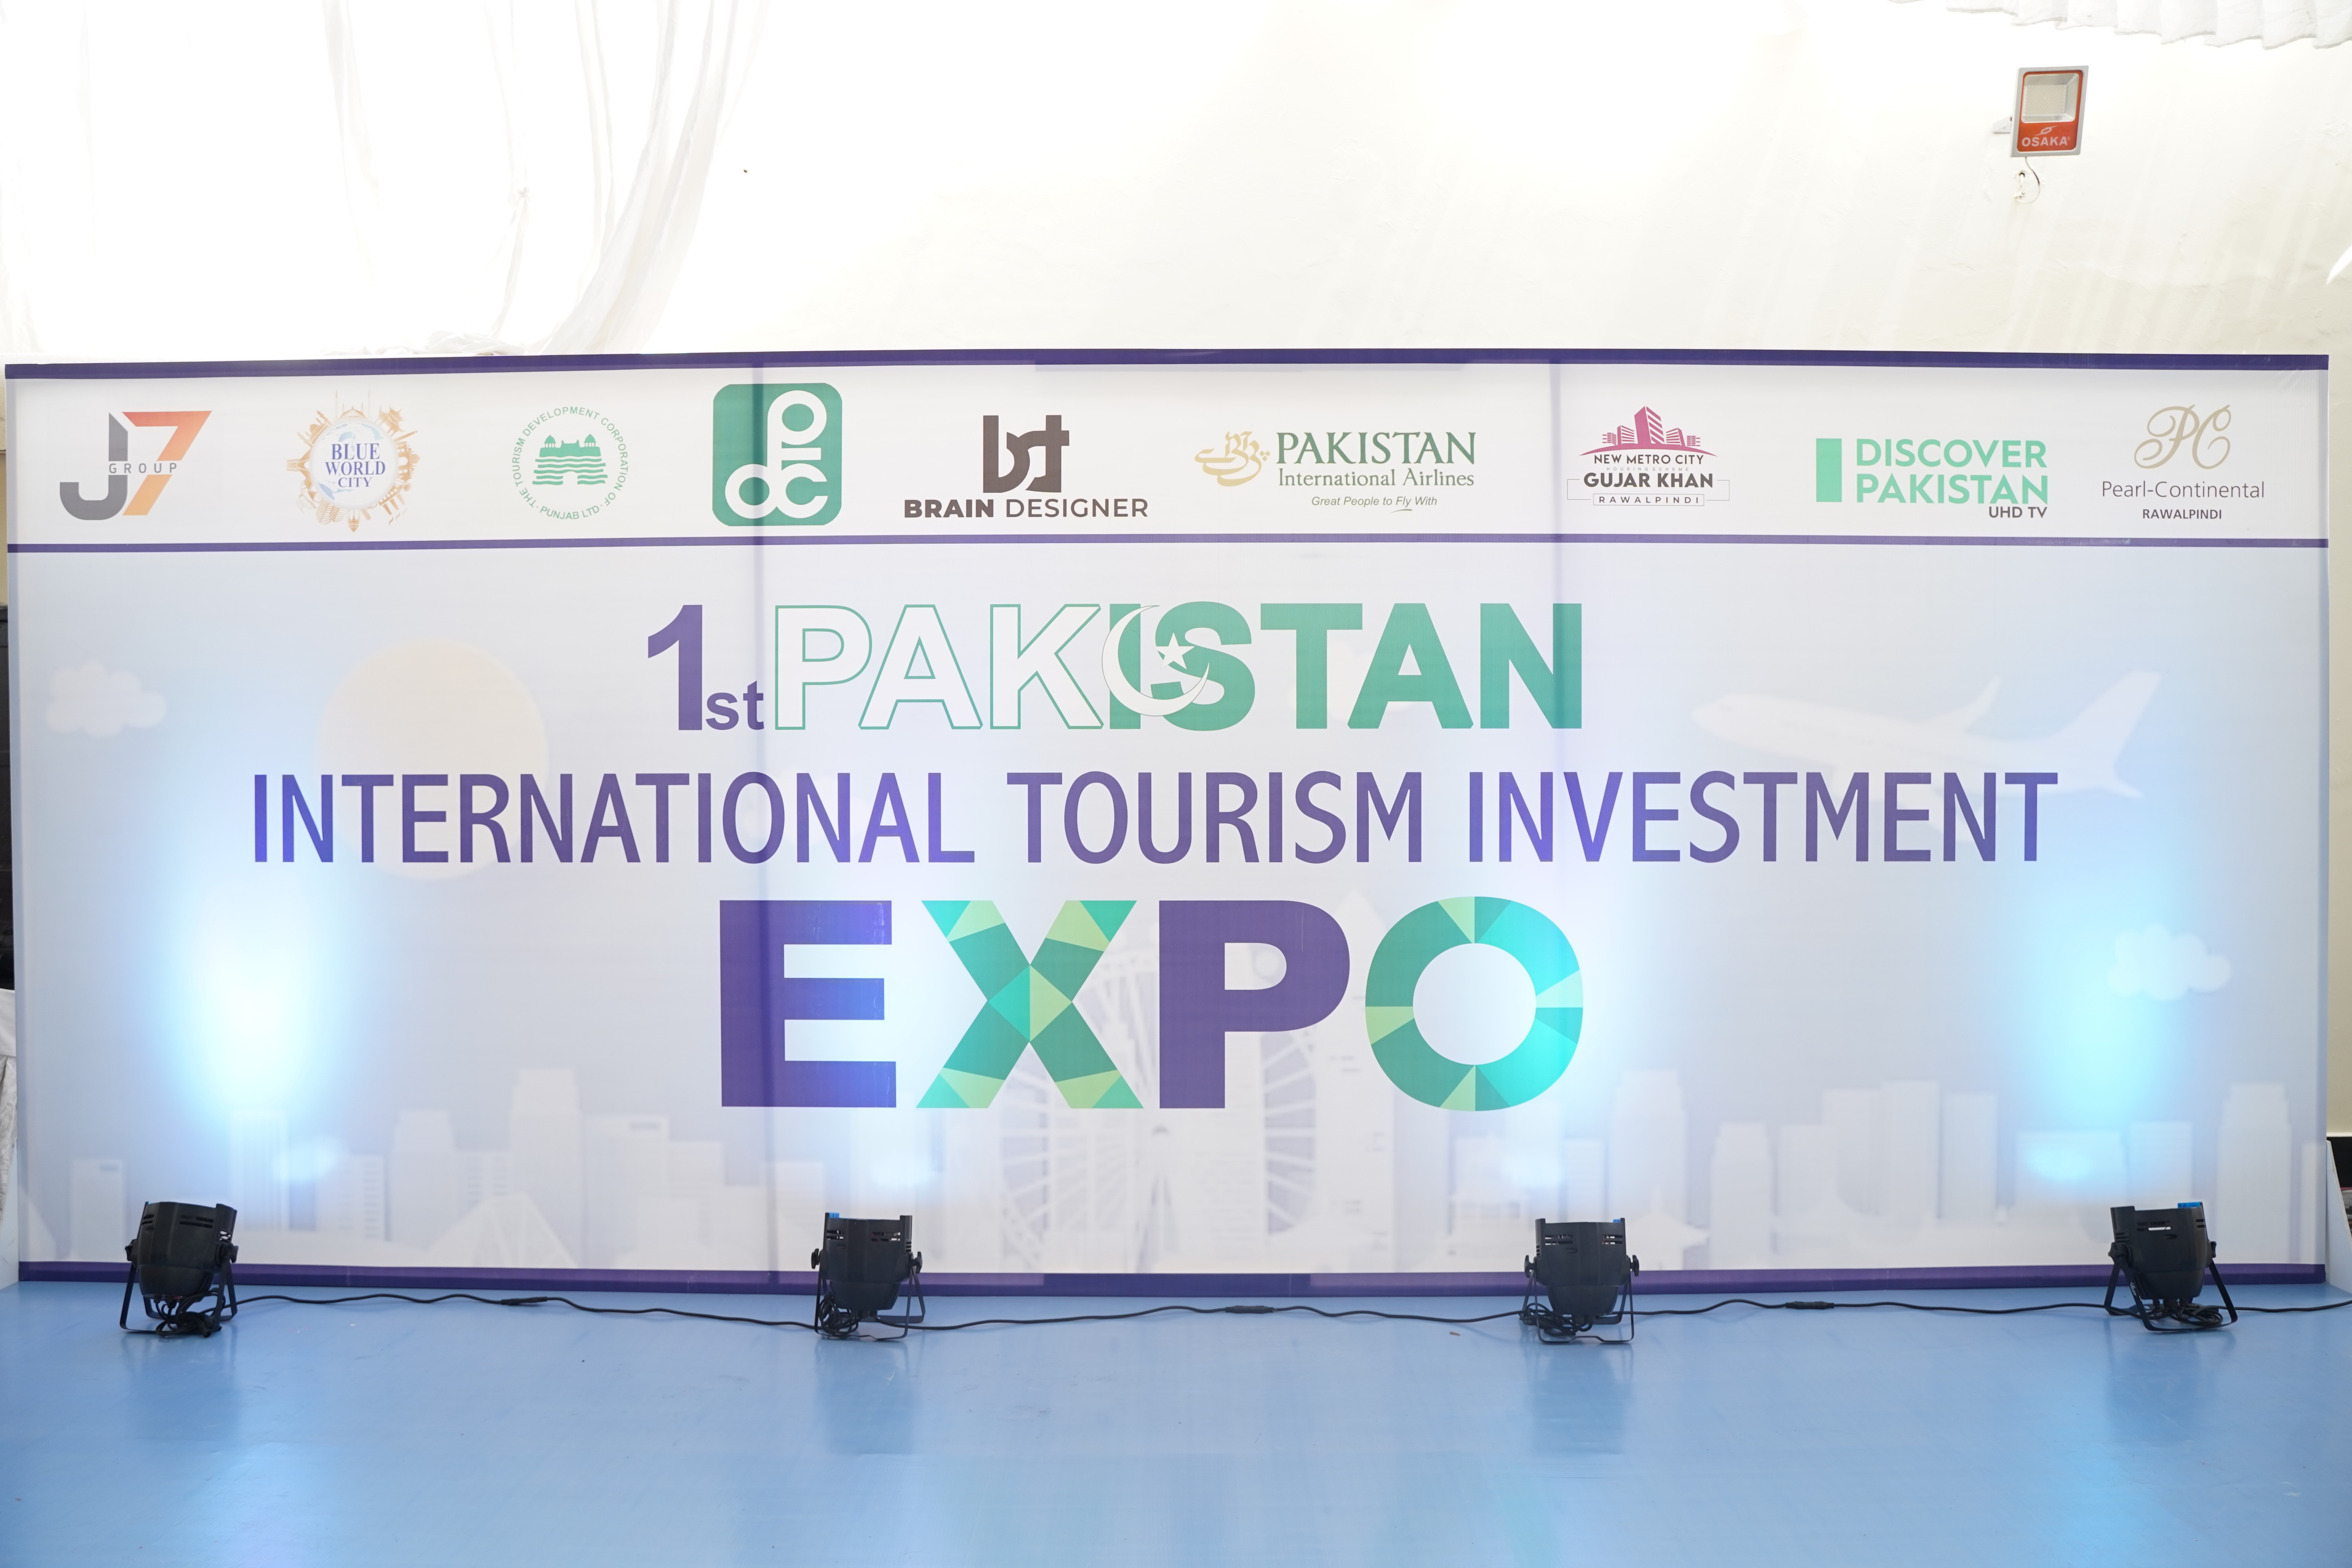 A banner showing 1st Pakistan International Tourism Investment Expo